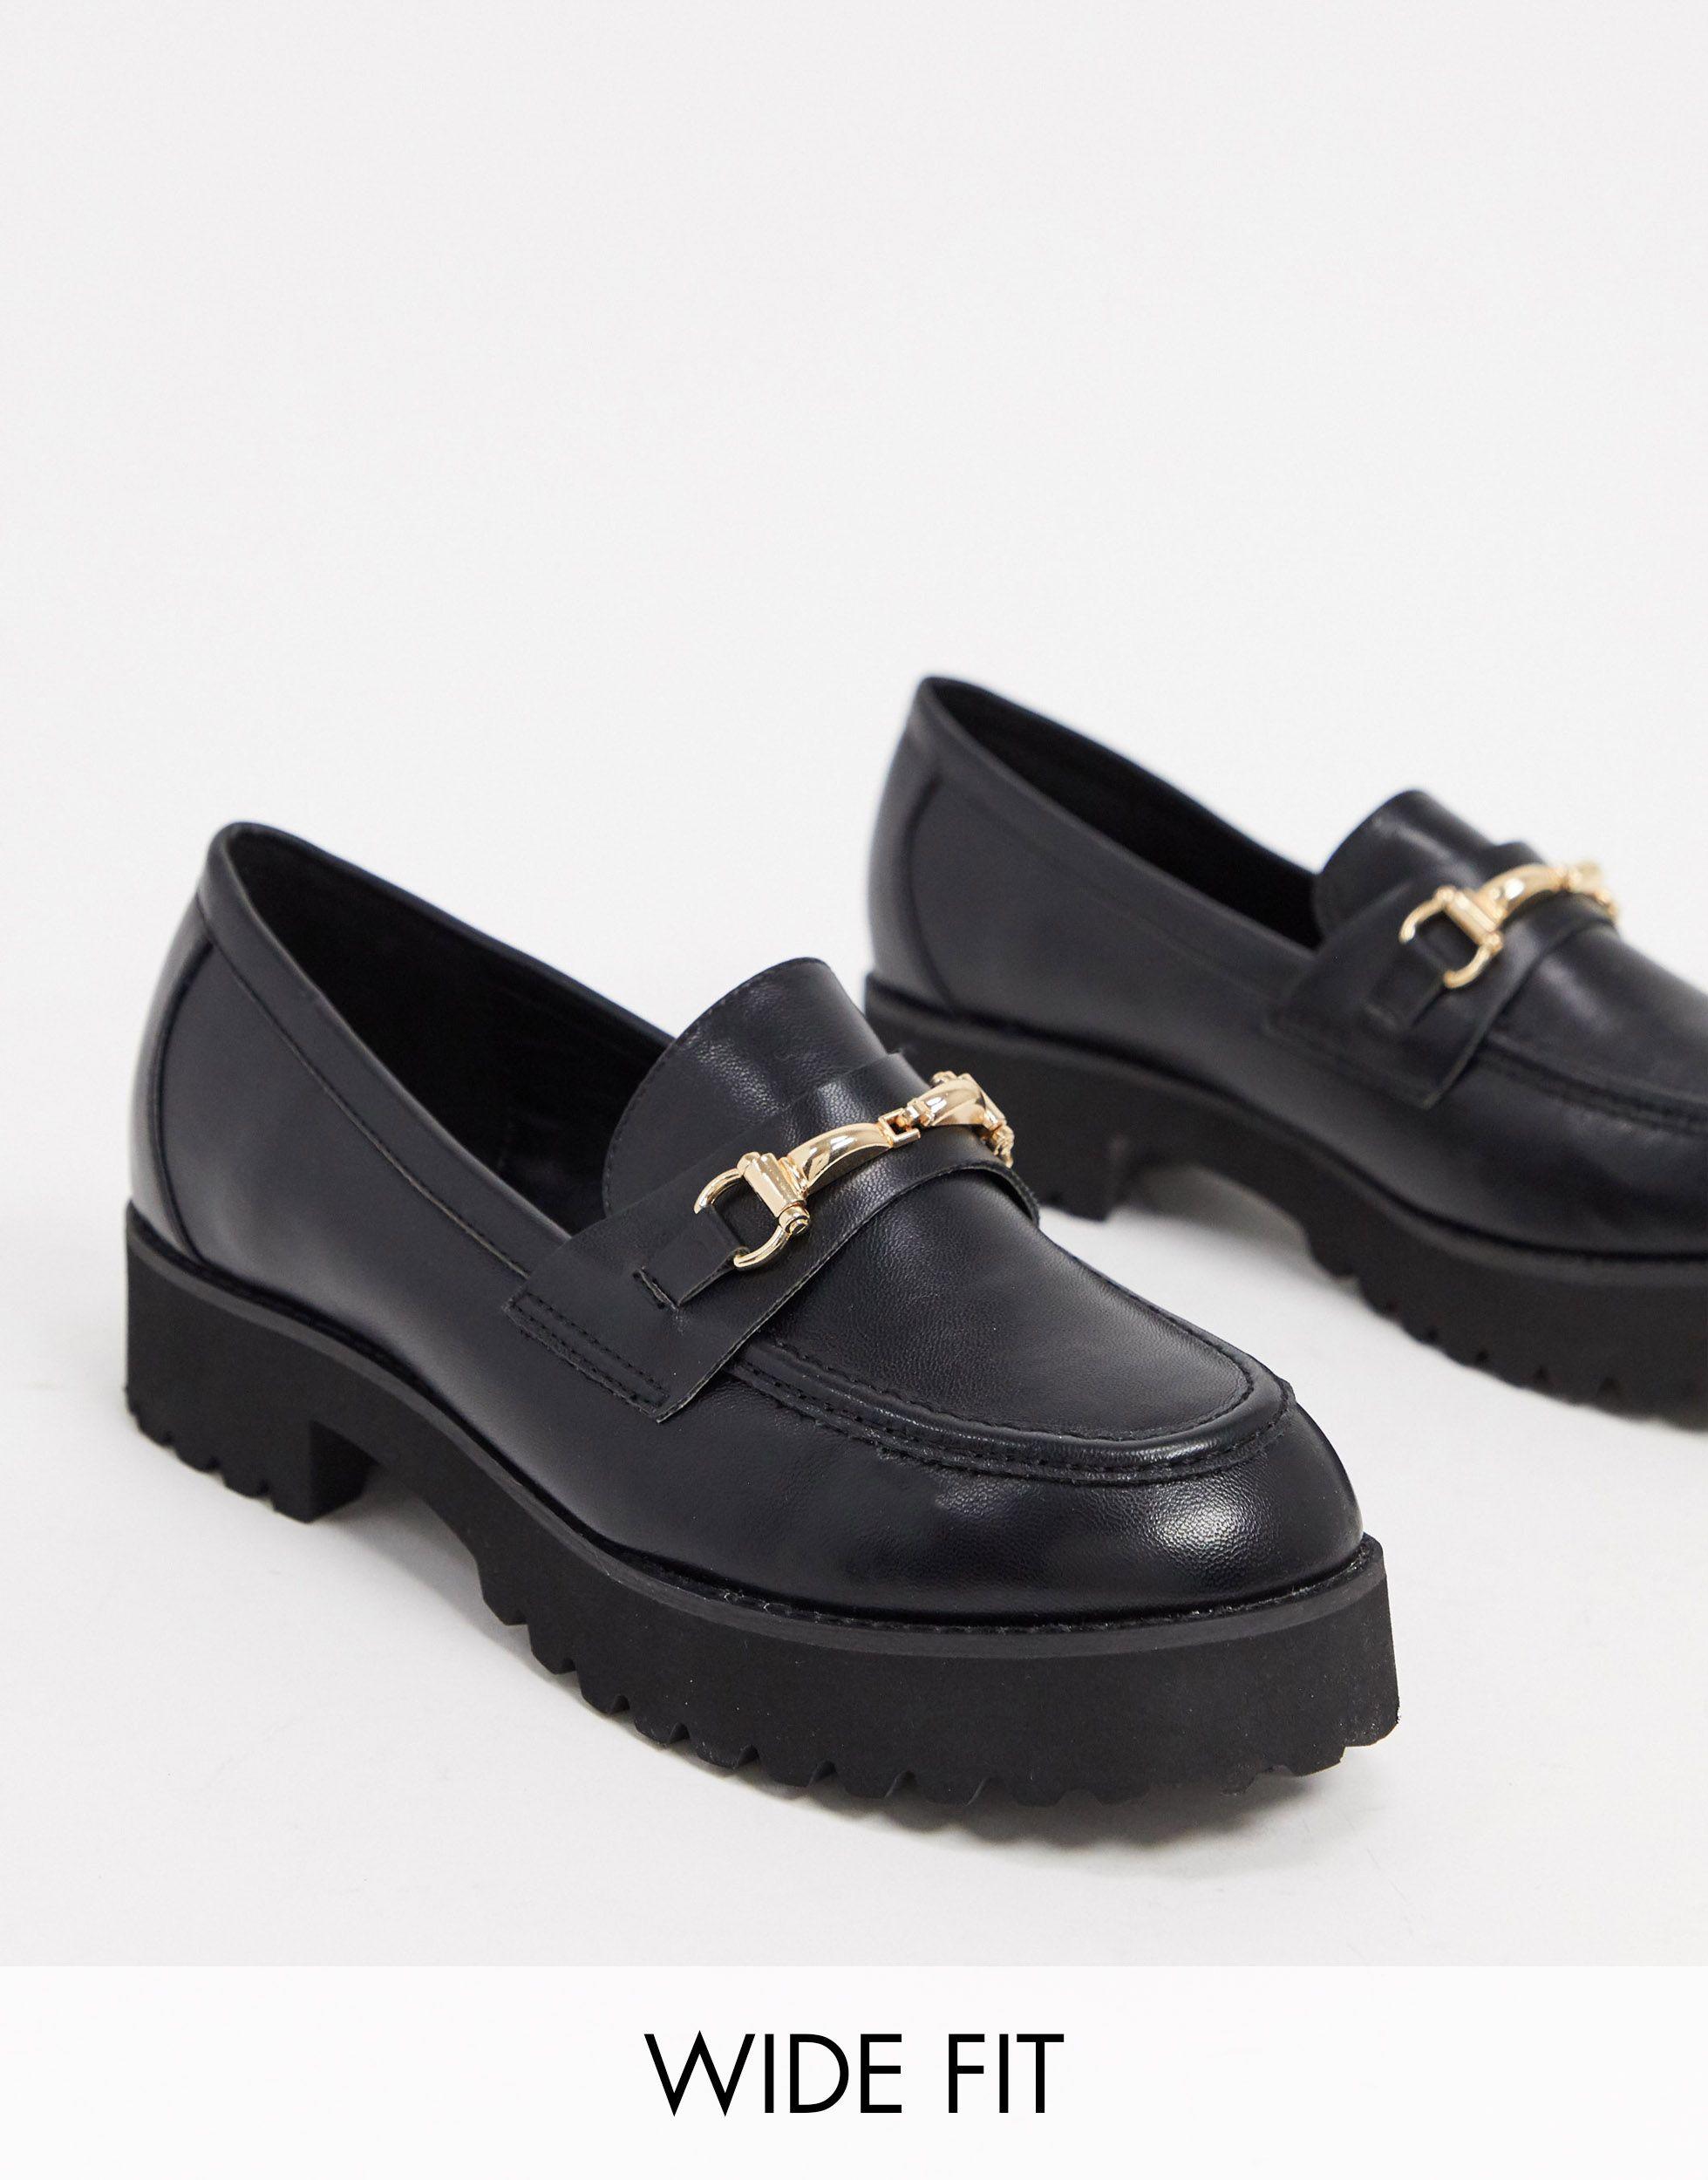 Wide With Loafers | tunersread.com